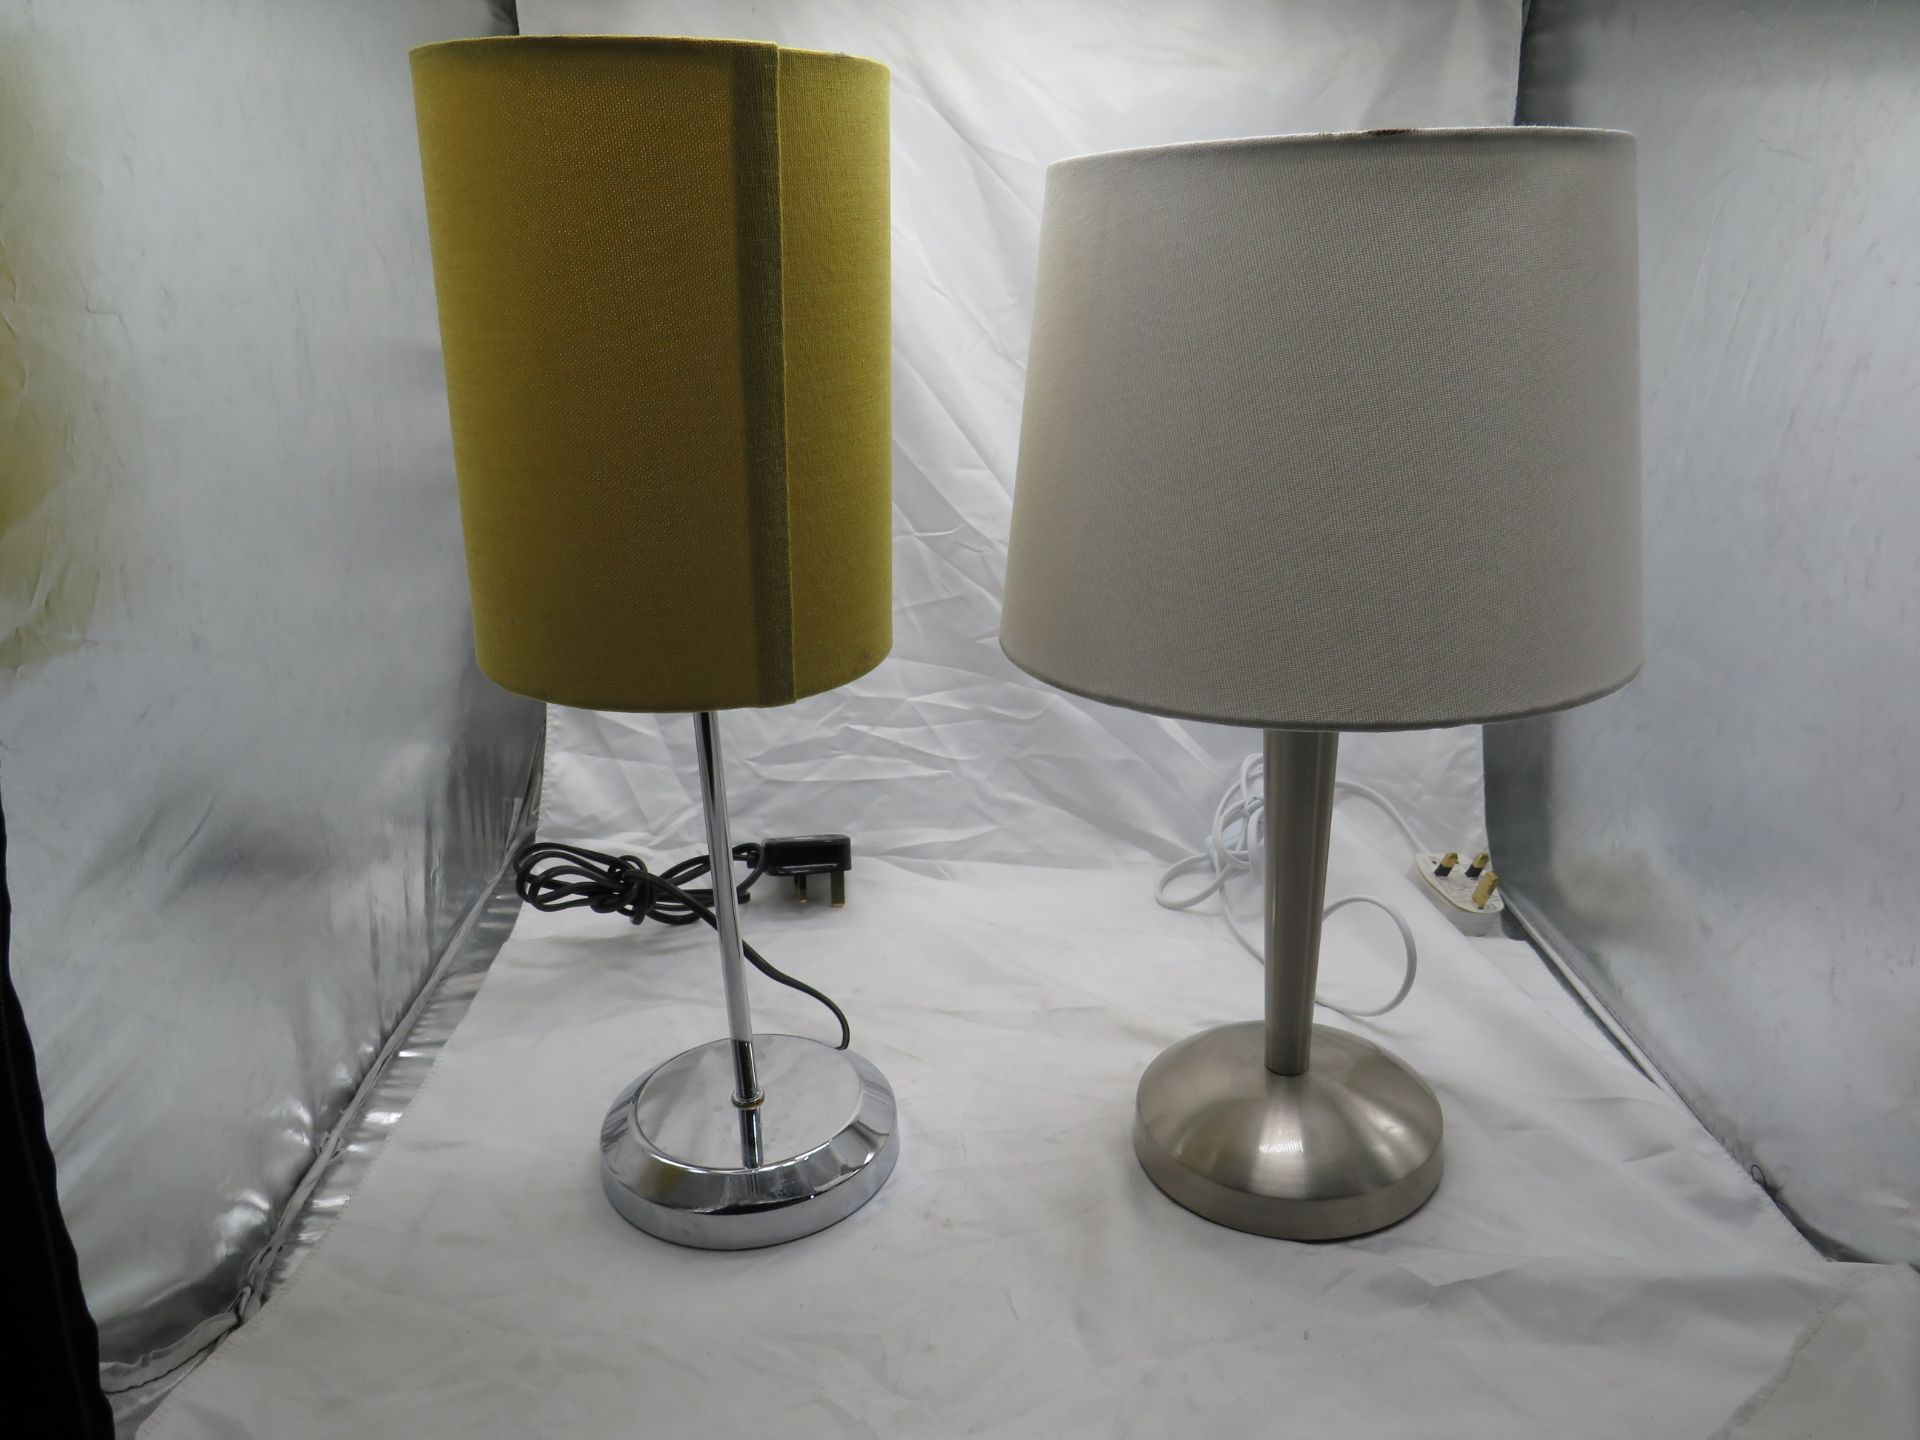 2x Various Ex-display Table?Lamp see image for design